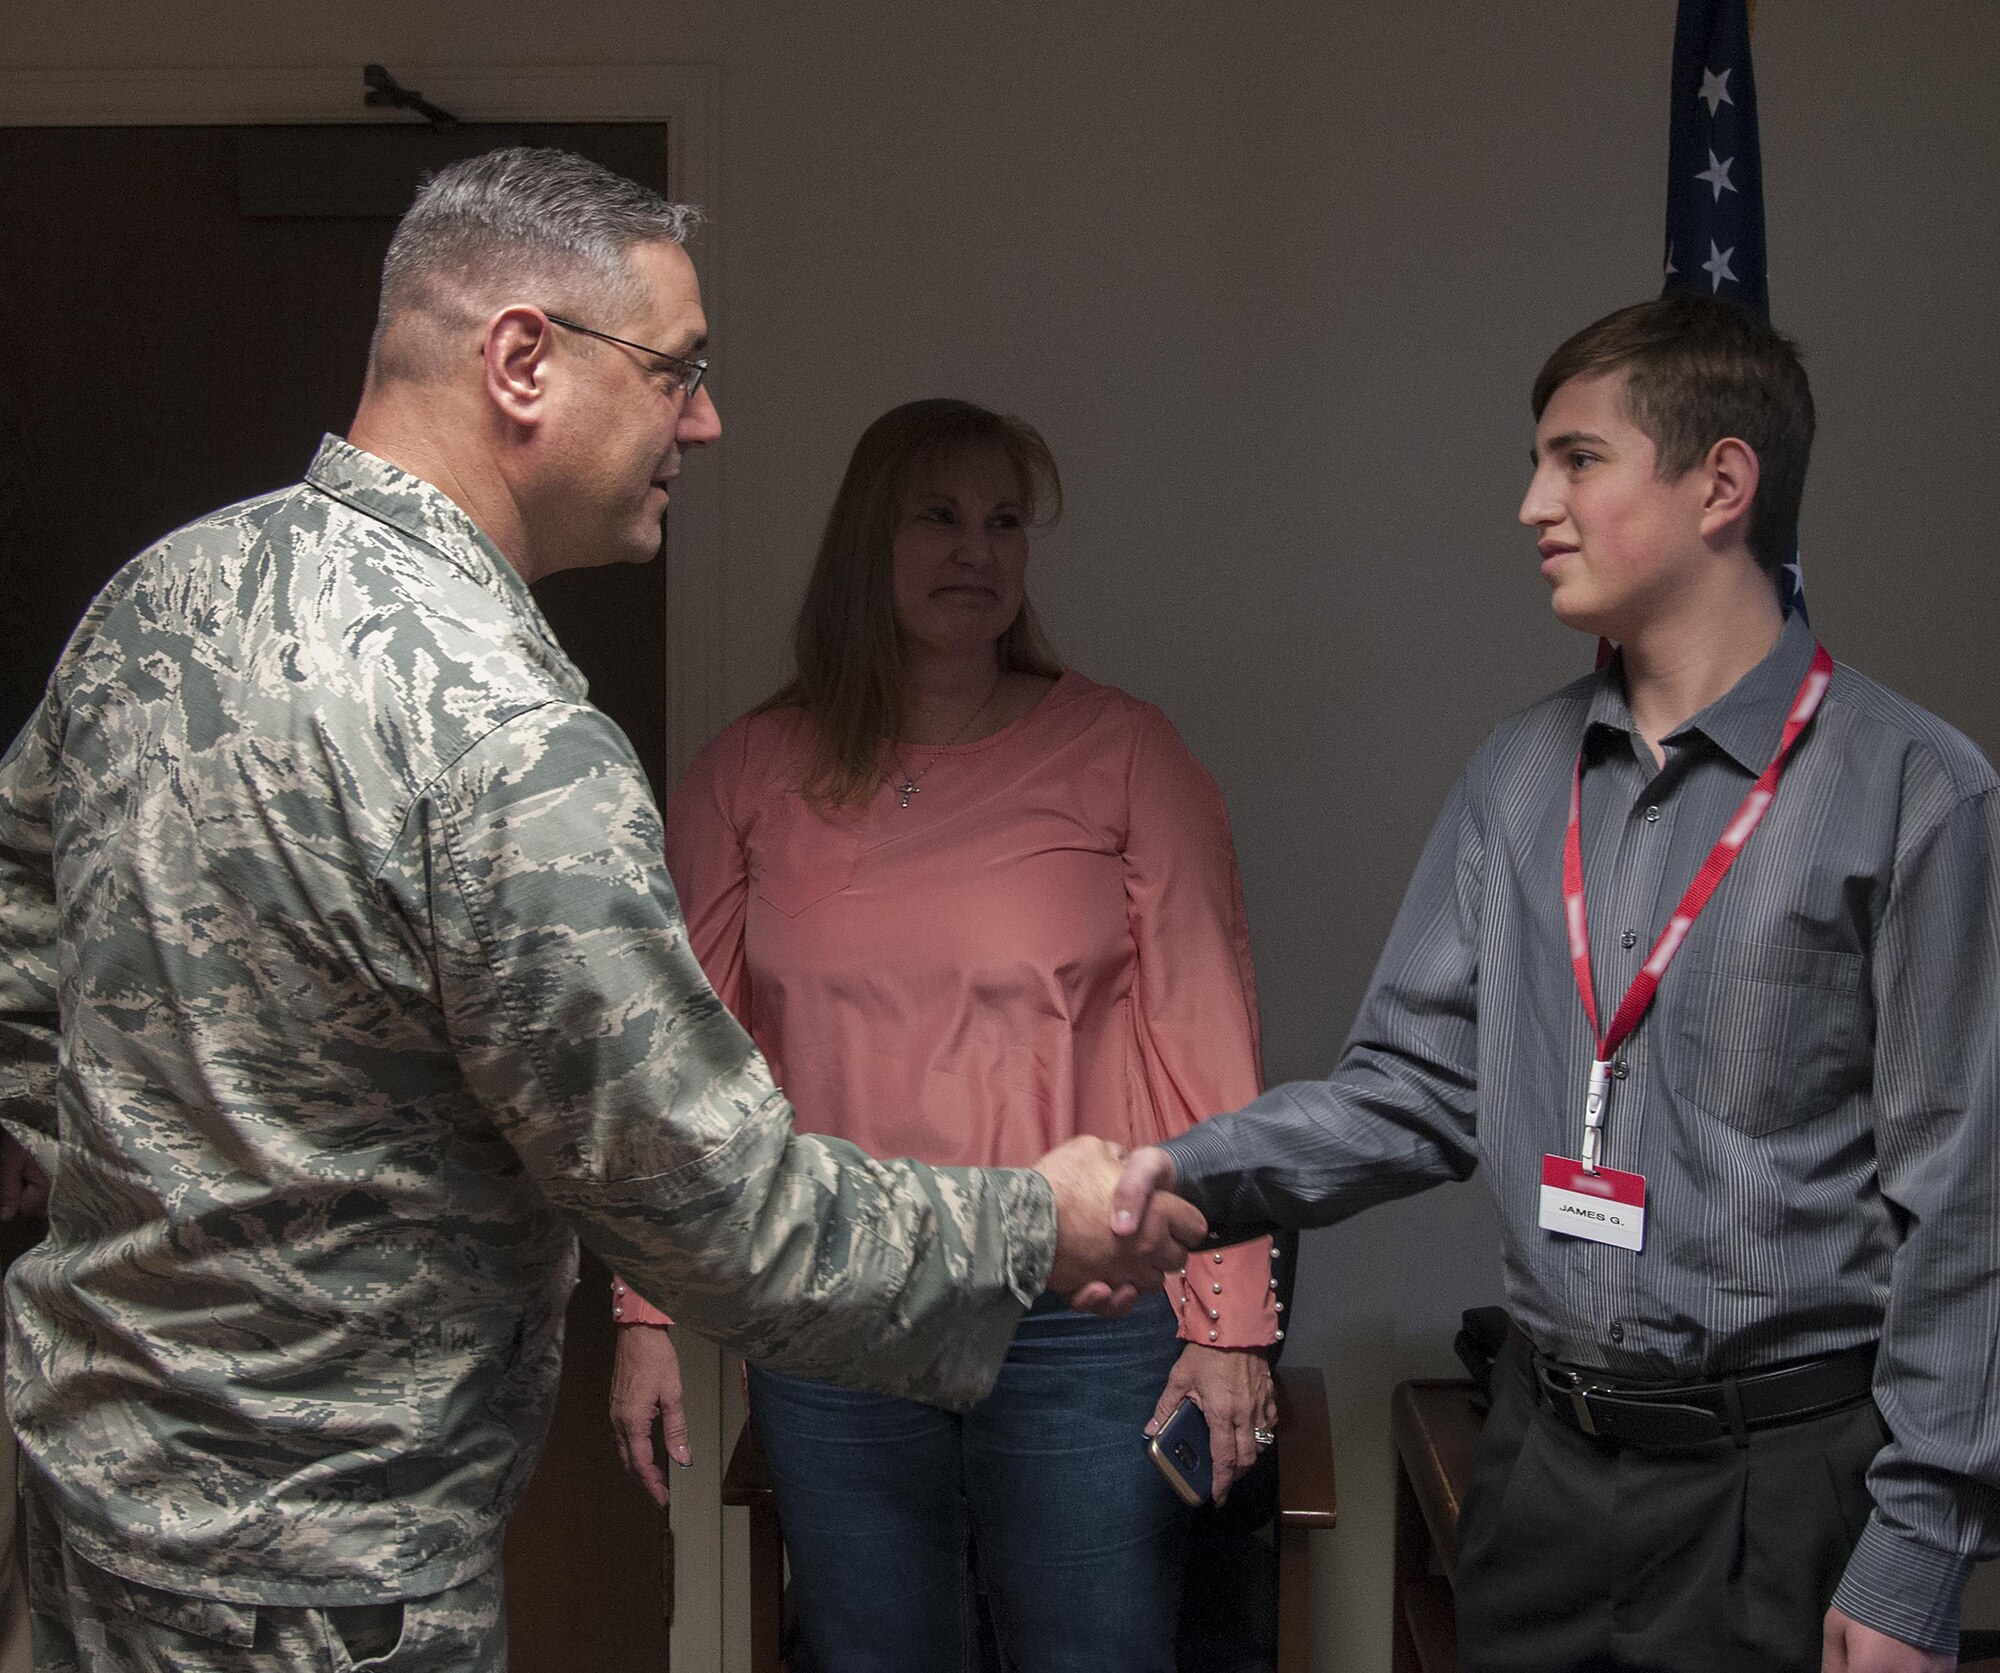 In this photo illustration, Col. Stephen Kravitsky, 90th Missile Wing commander, shakes hands with James Gay, 16, a former F.E. Warren Commissary employee, April 12, 2016, on F.E. Warren Air Force Base, Wyo. Gay saved the life of a co-worker who suffered heart troubles on the job while Gay still worked at the commissary. (U.S. Air Force photo illustration by Senior Airman Jason Wiese)